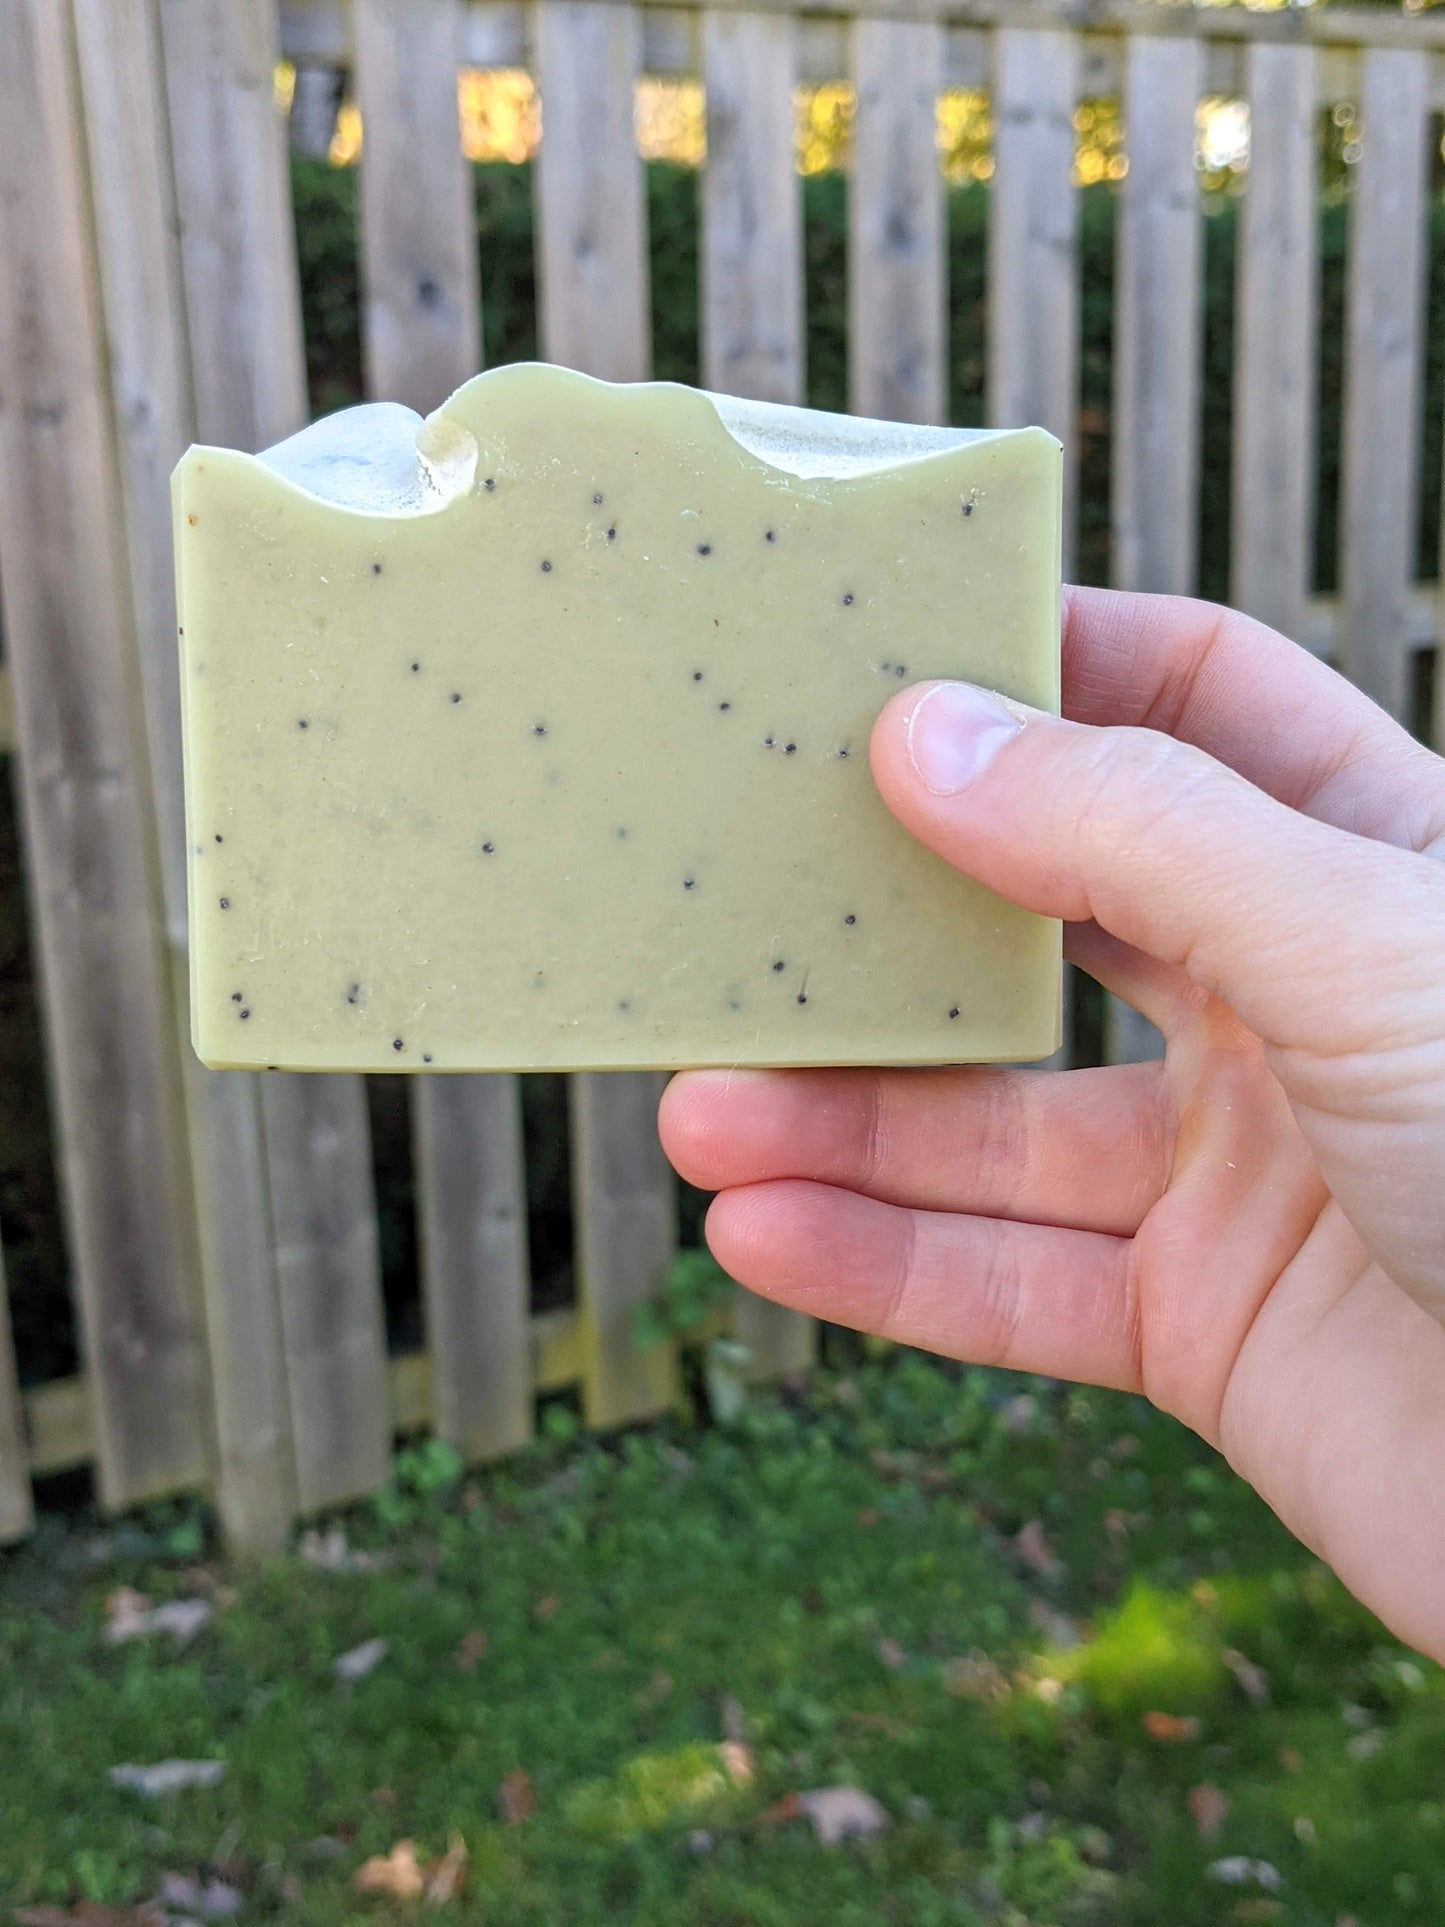 Natural Soap | CUCUMBER MINT - Rosemary, Peppermint & Spearmint with Poppy Seeds